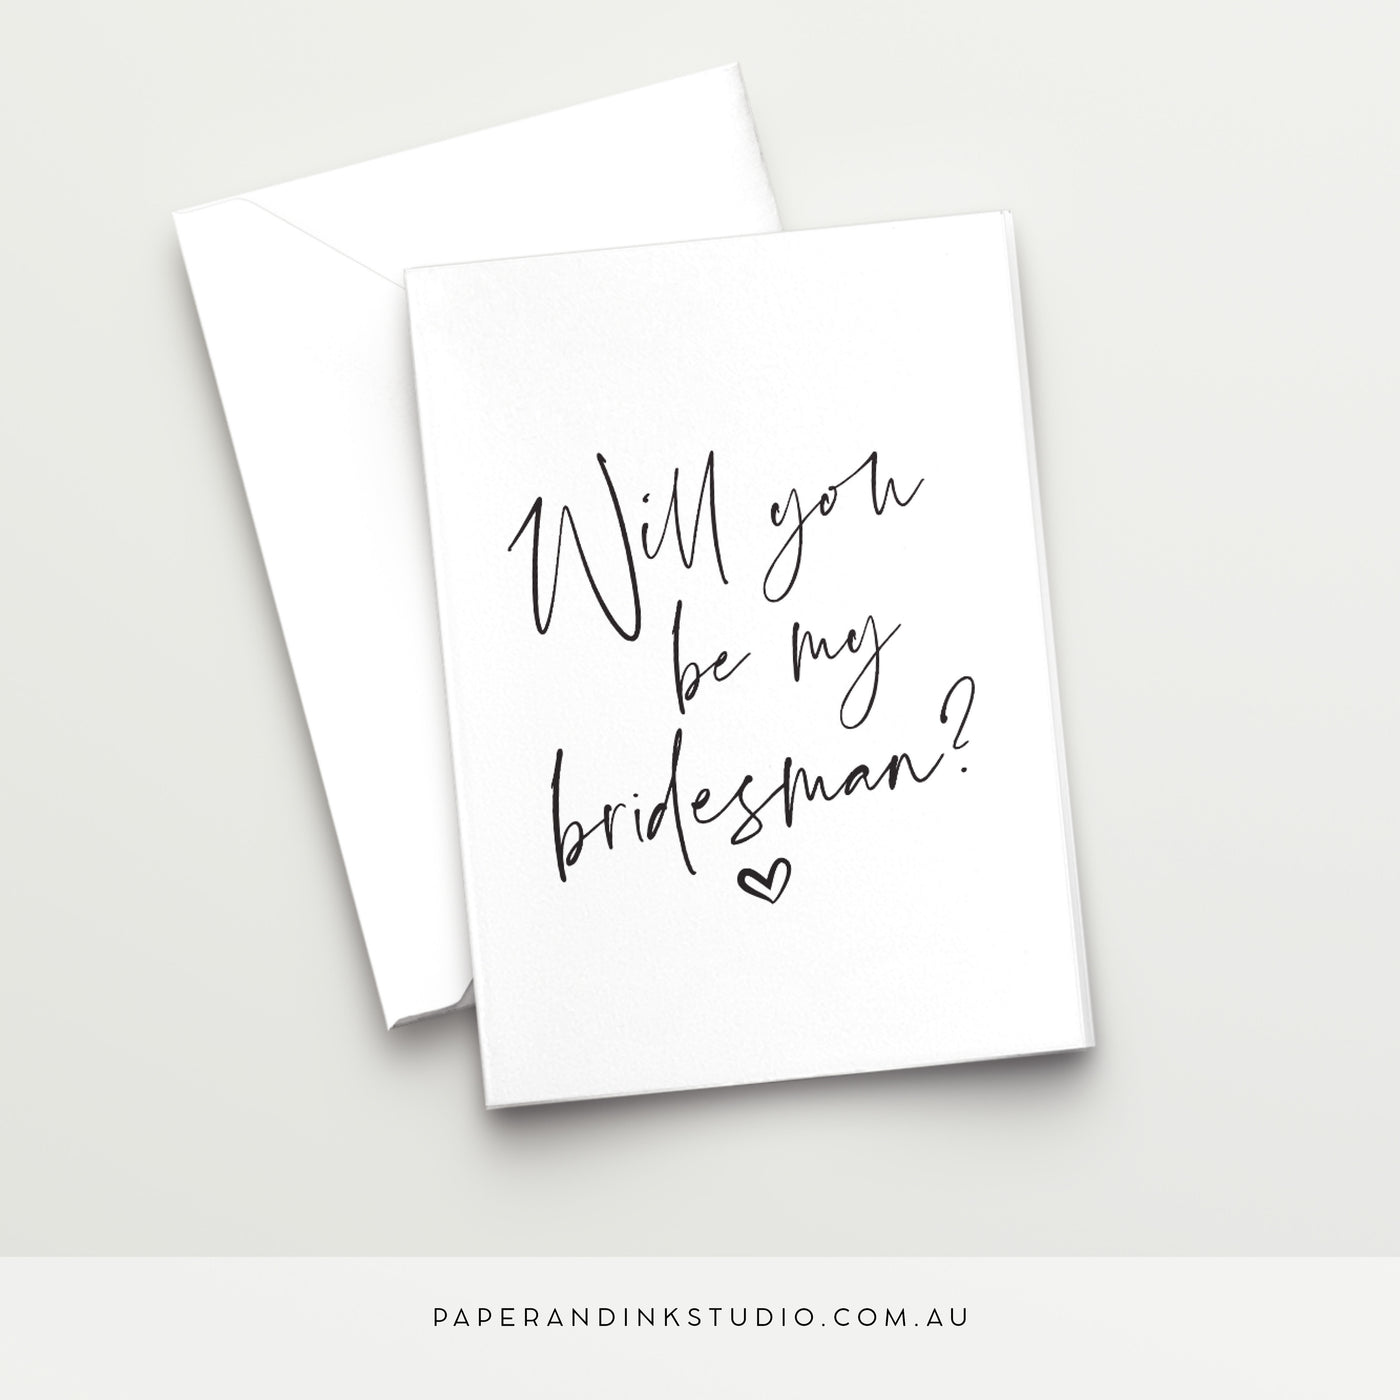 A white folded wedding or best woman card in a design called Thorne with black writing that says will you be my bridesman, asking your friend to be in the bridal party at your wedding.